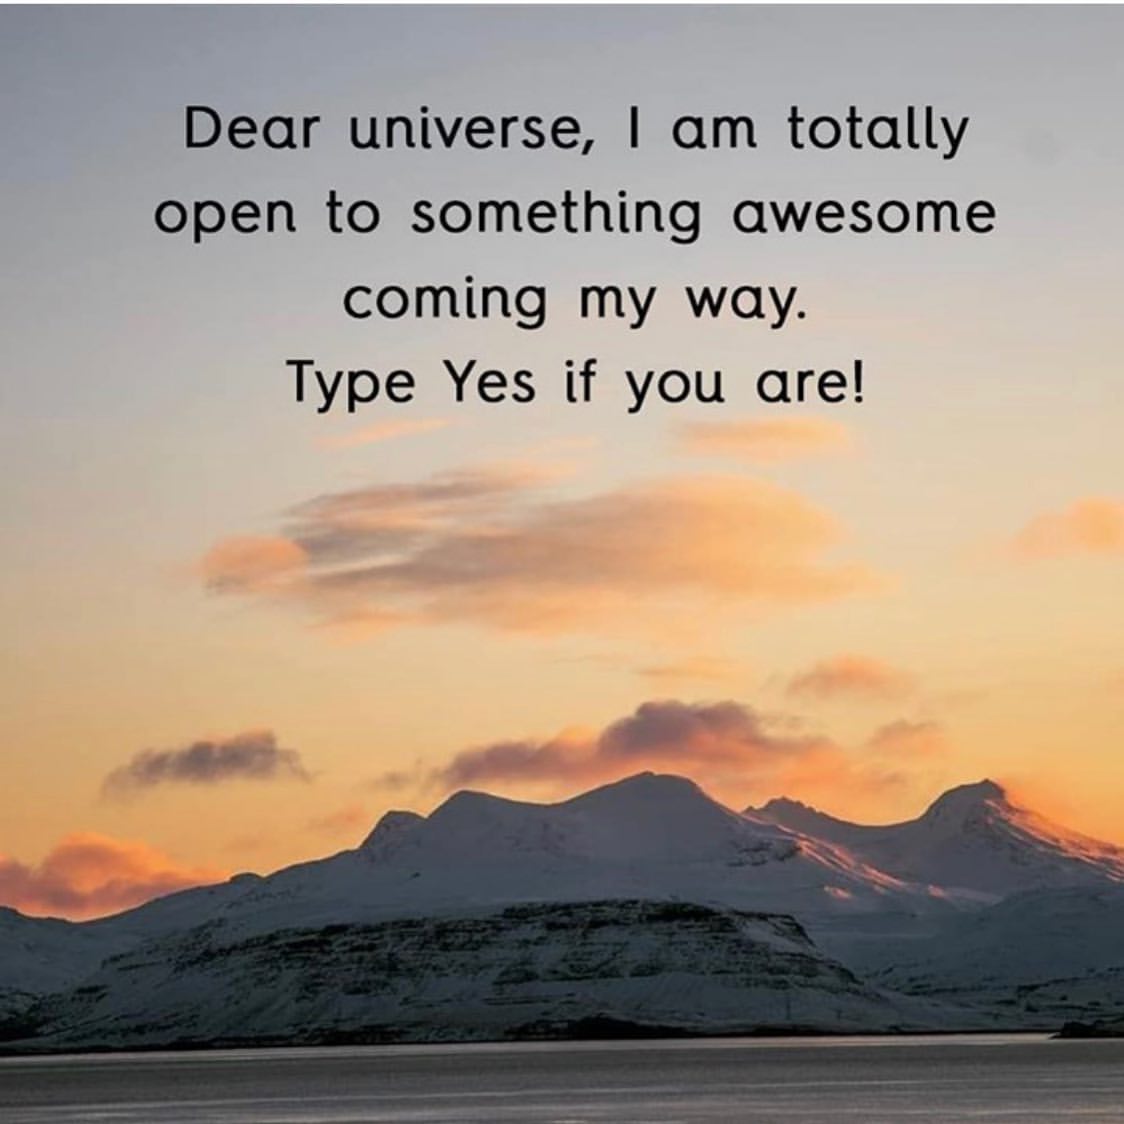 Dear universe, I am totally open to something awesome coming my way. Type yes if you are!